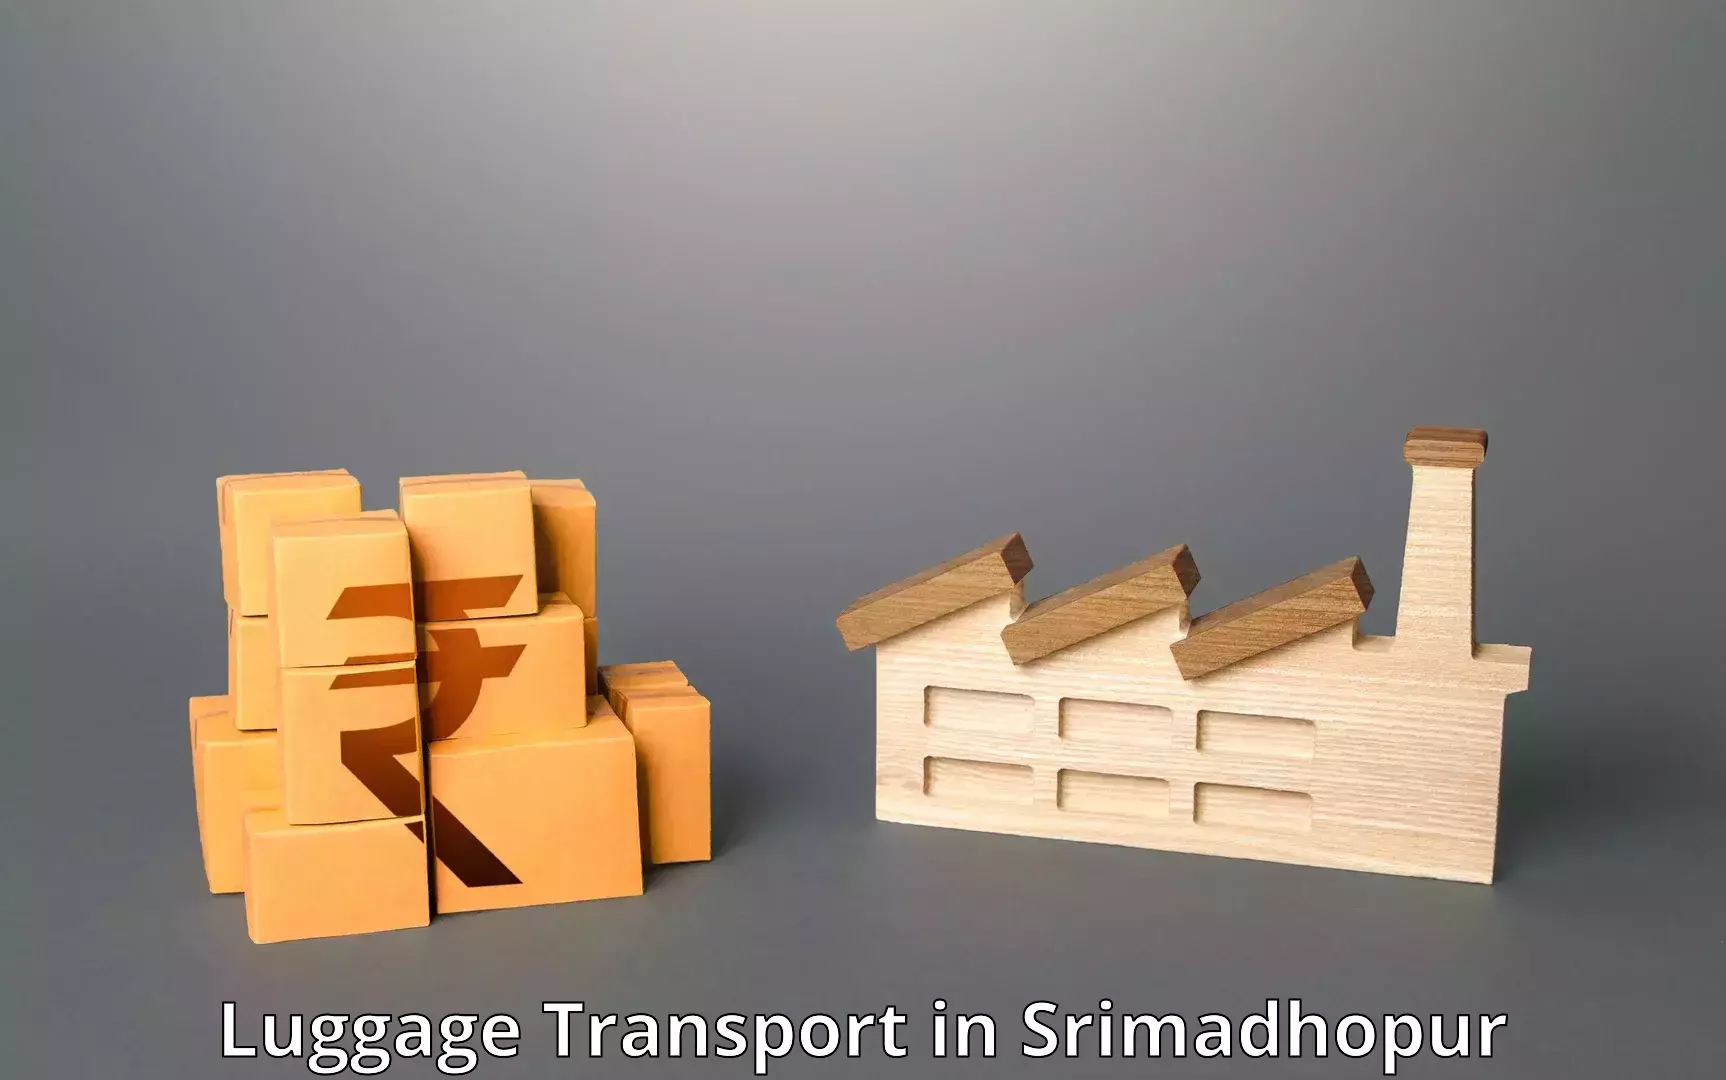 Luggage delivery logistics in Srimadhopur